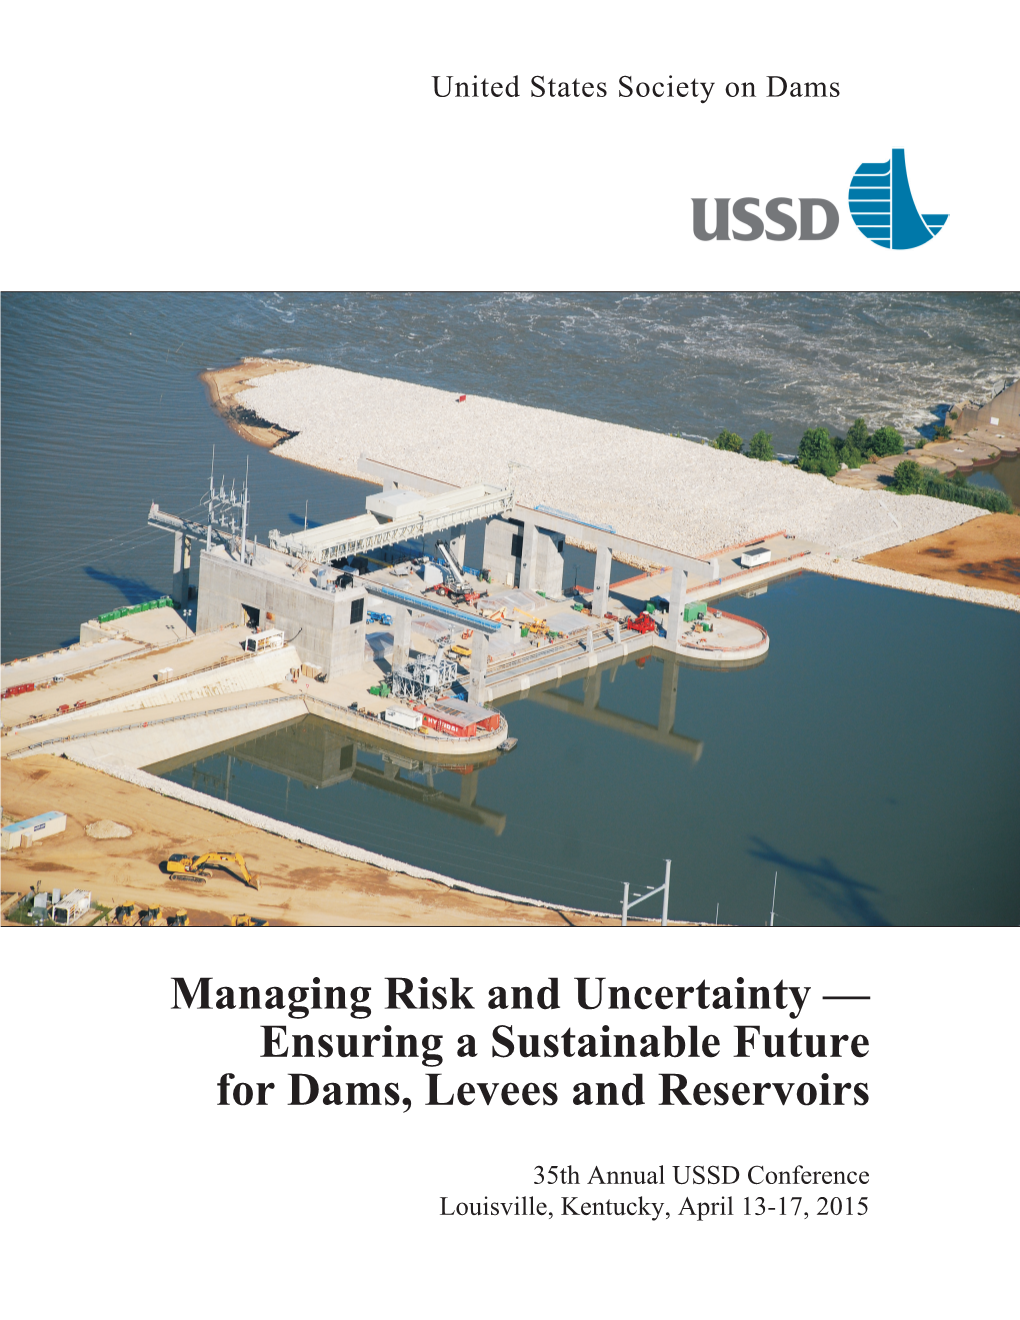 Ensuring a Sustainable Future for Dams, Levees and Reservoirs